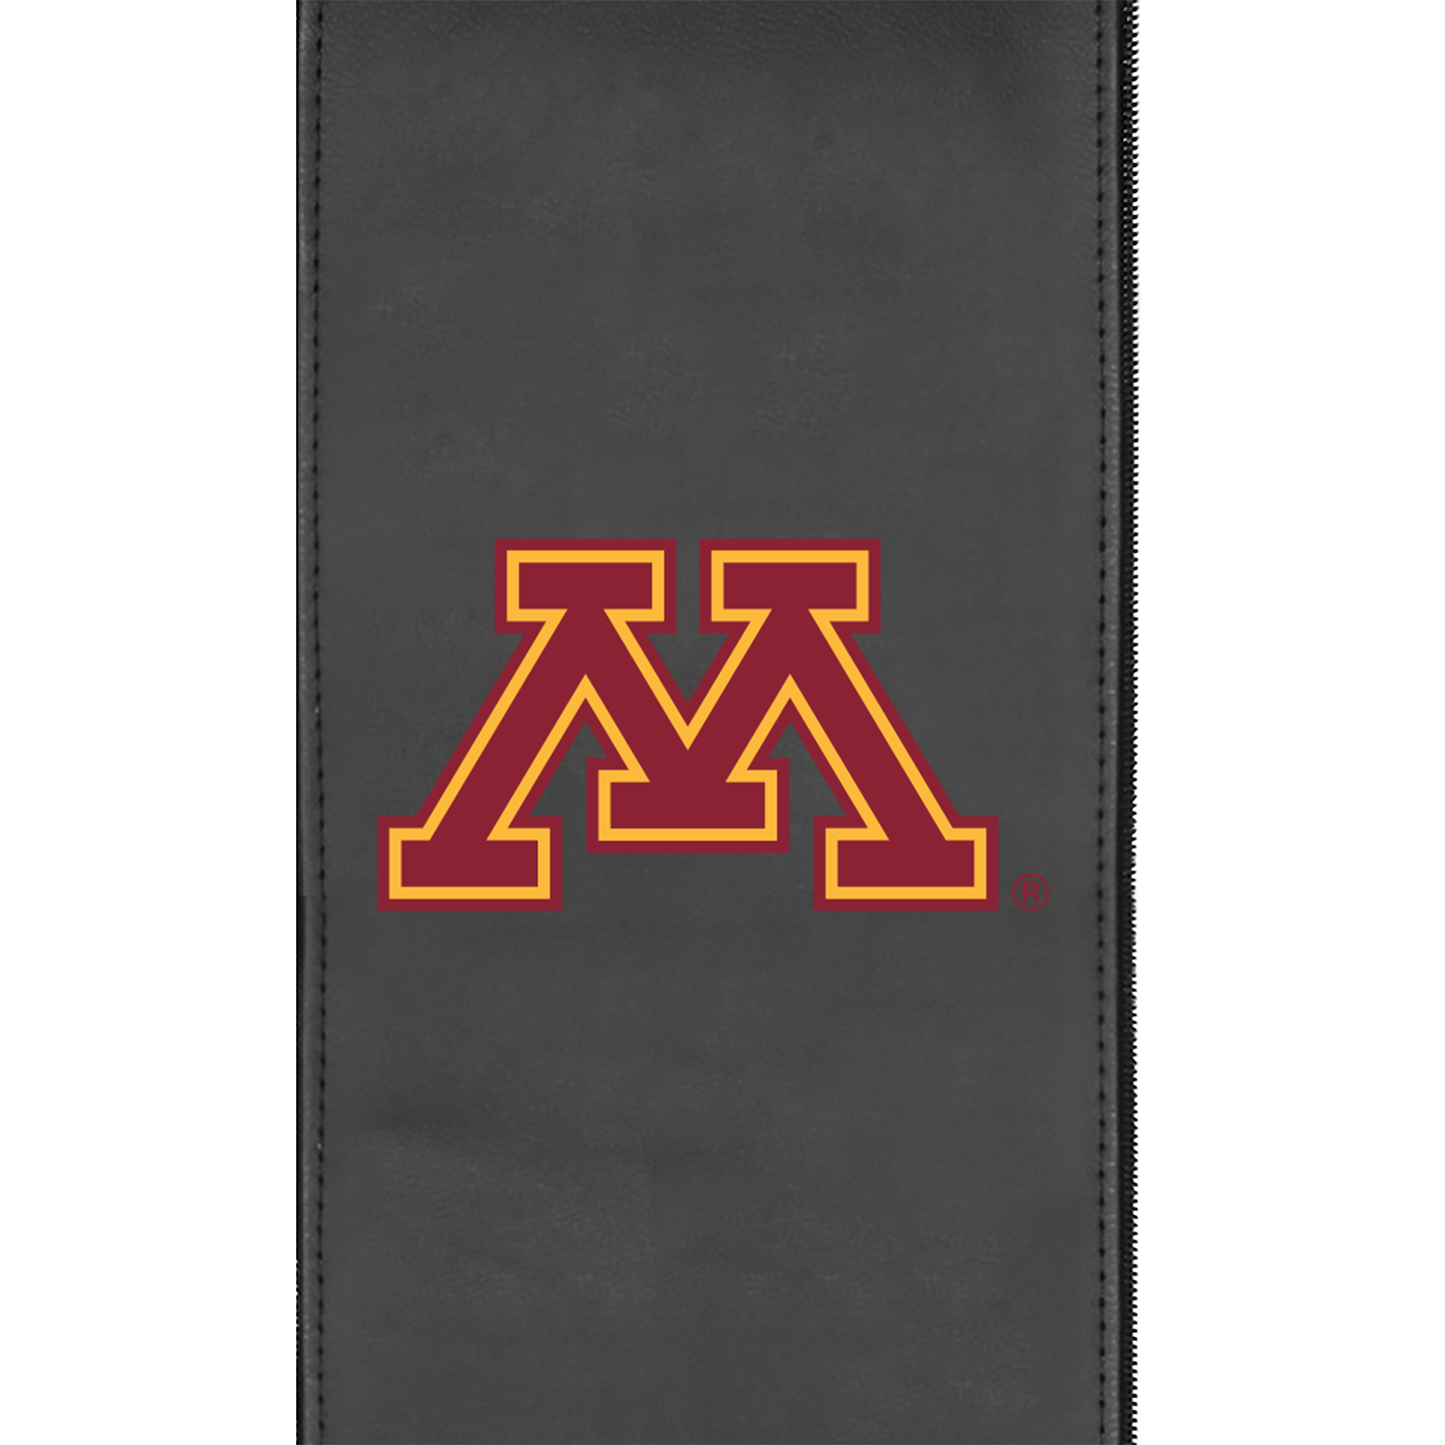 PhantomX Gaming Chair with Minnesota Golden Gophers Primary Logo